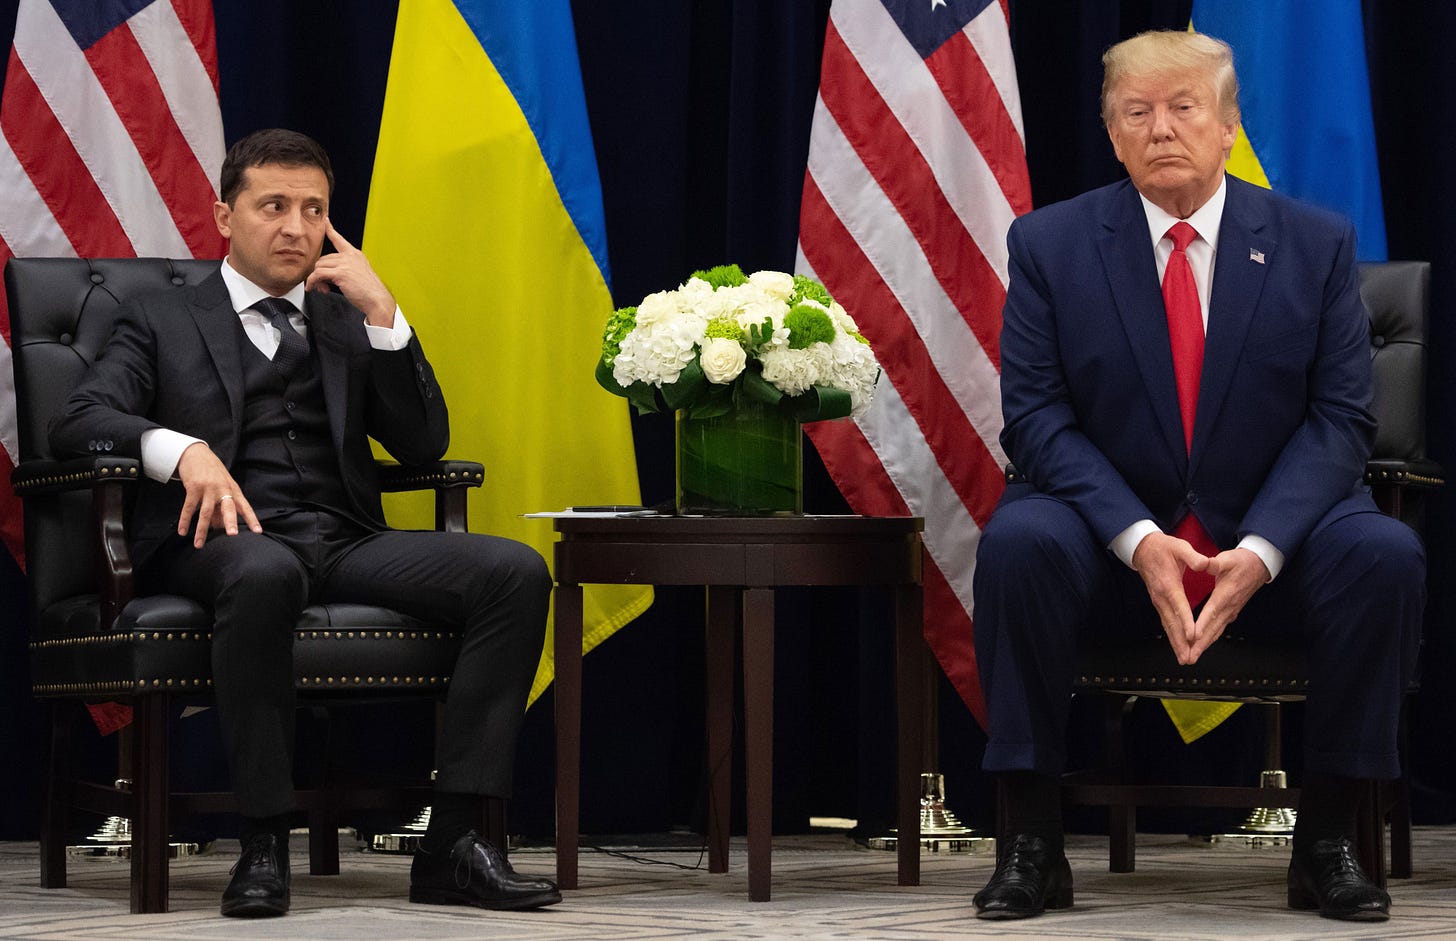 By pressing Zelensky for political favors, Trump upended US support for  'rule of law' in Ukraine | CNN Politics